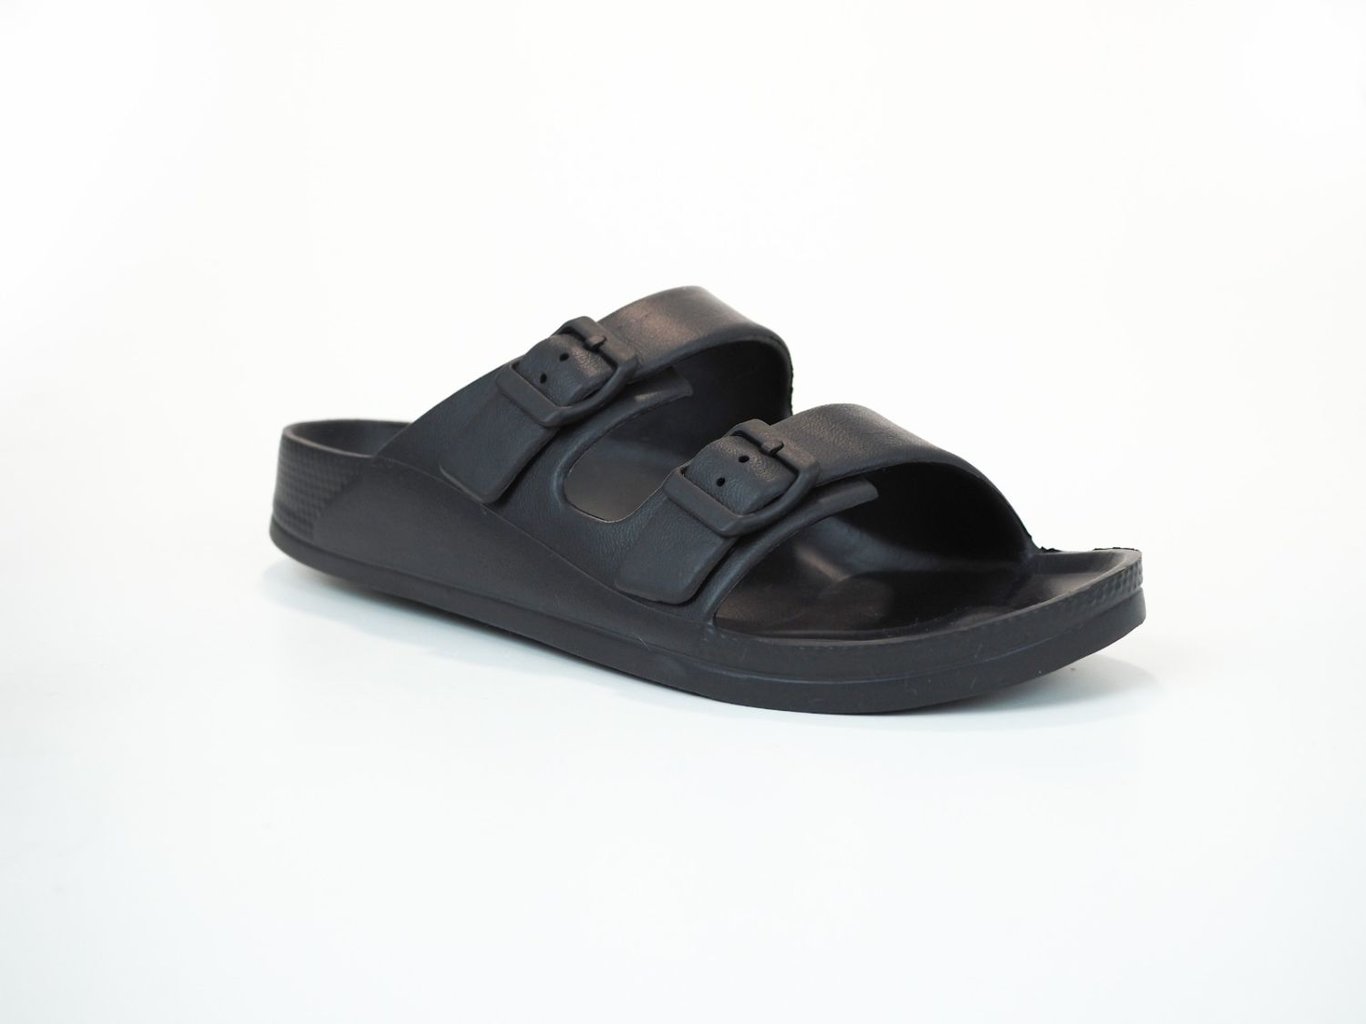 YOOYU ARES DOUBLE BUCKLE SLIPPER